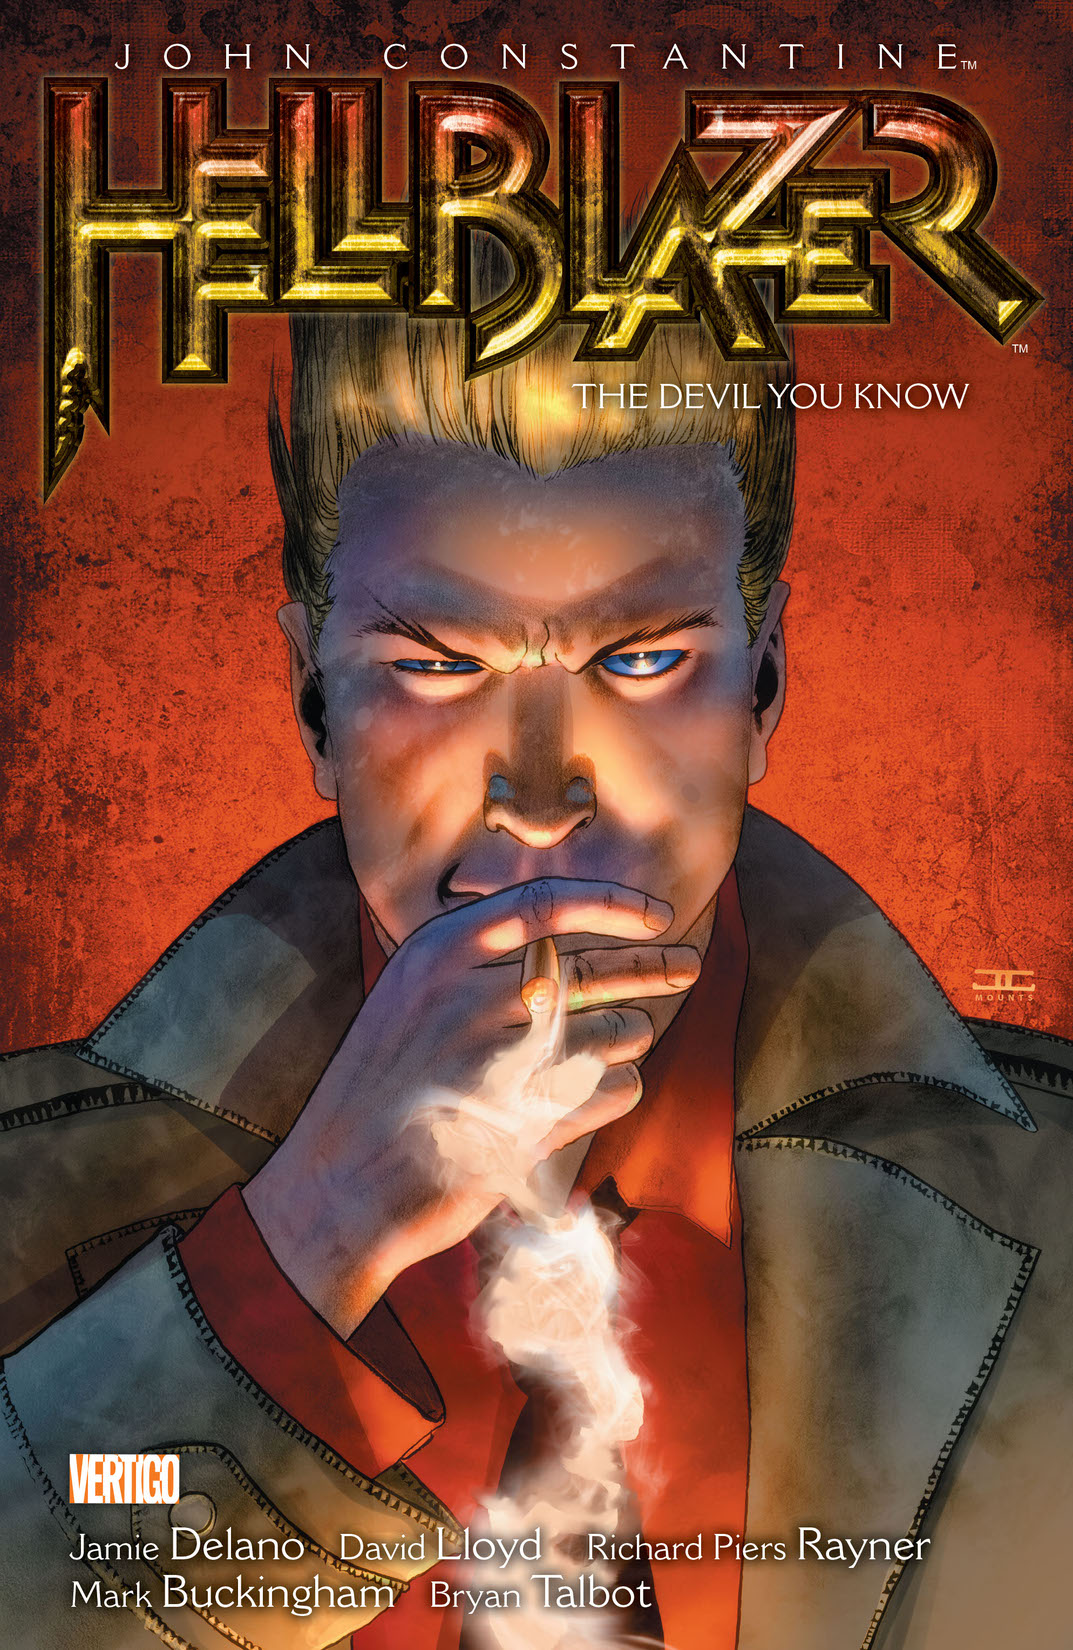 John Constantine, Hellblazer Vol. 2: The Devil You Know (New Edition) preview images